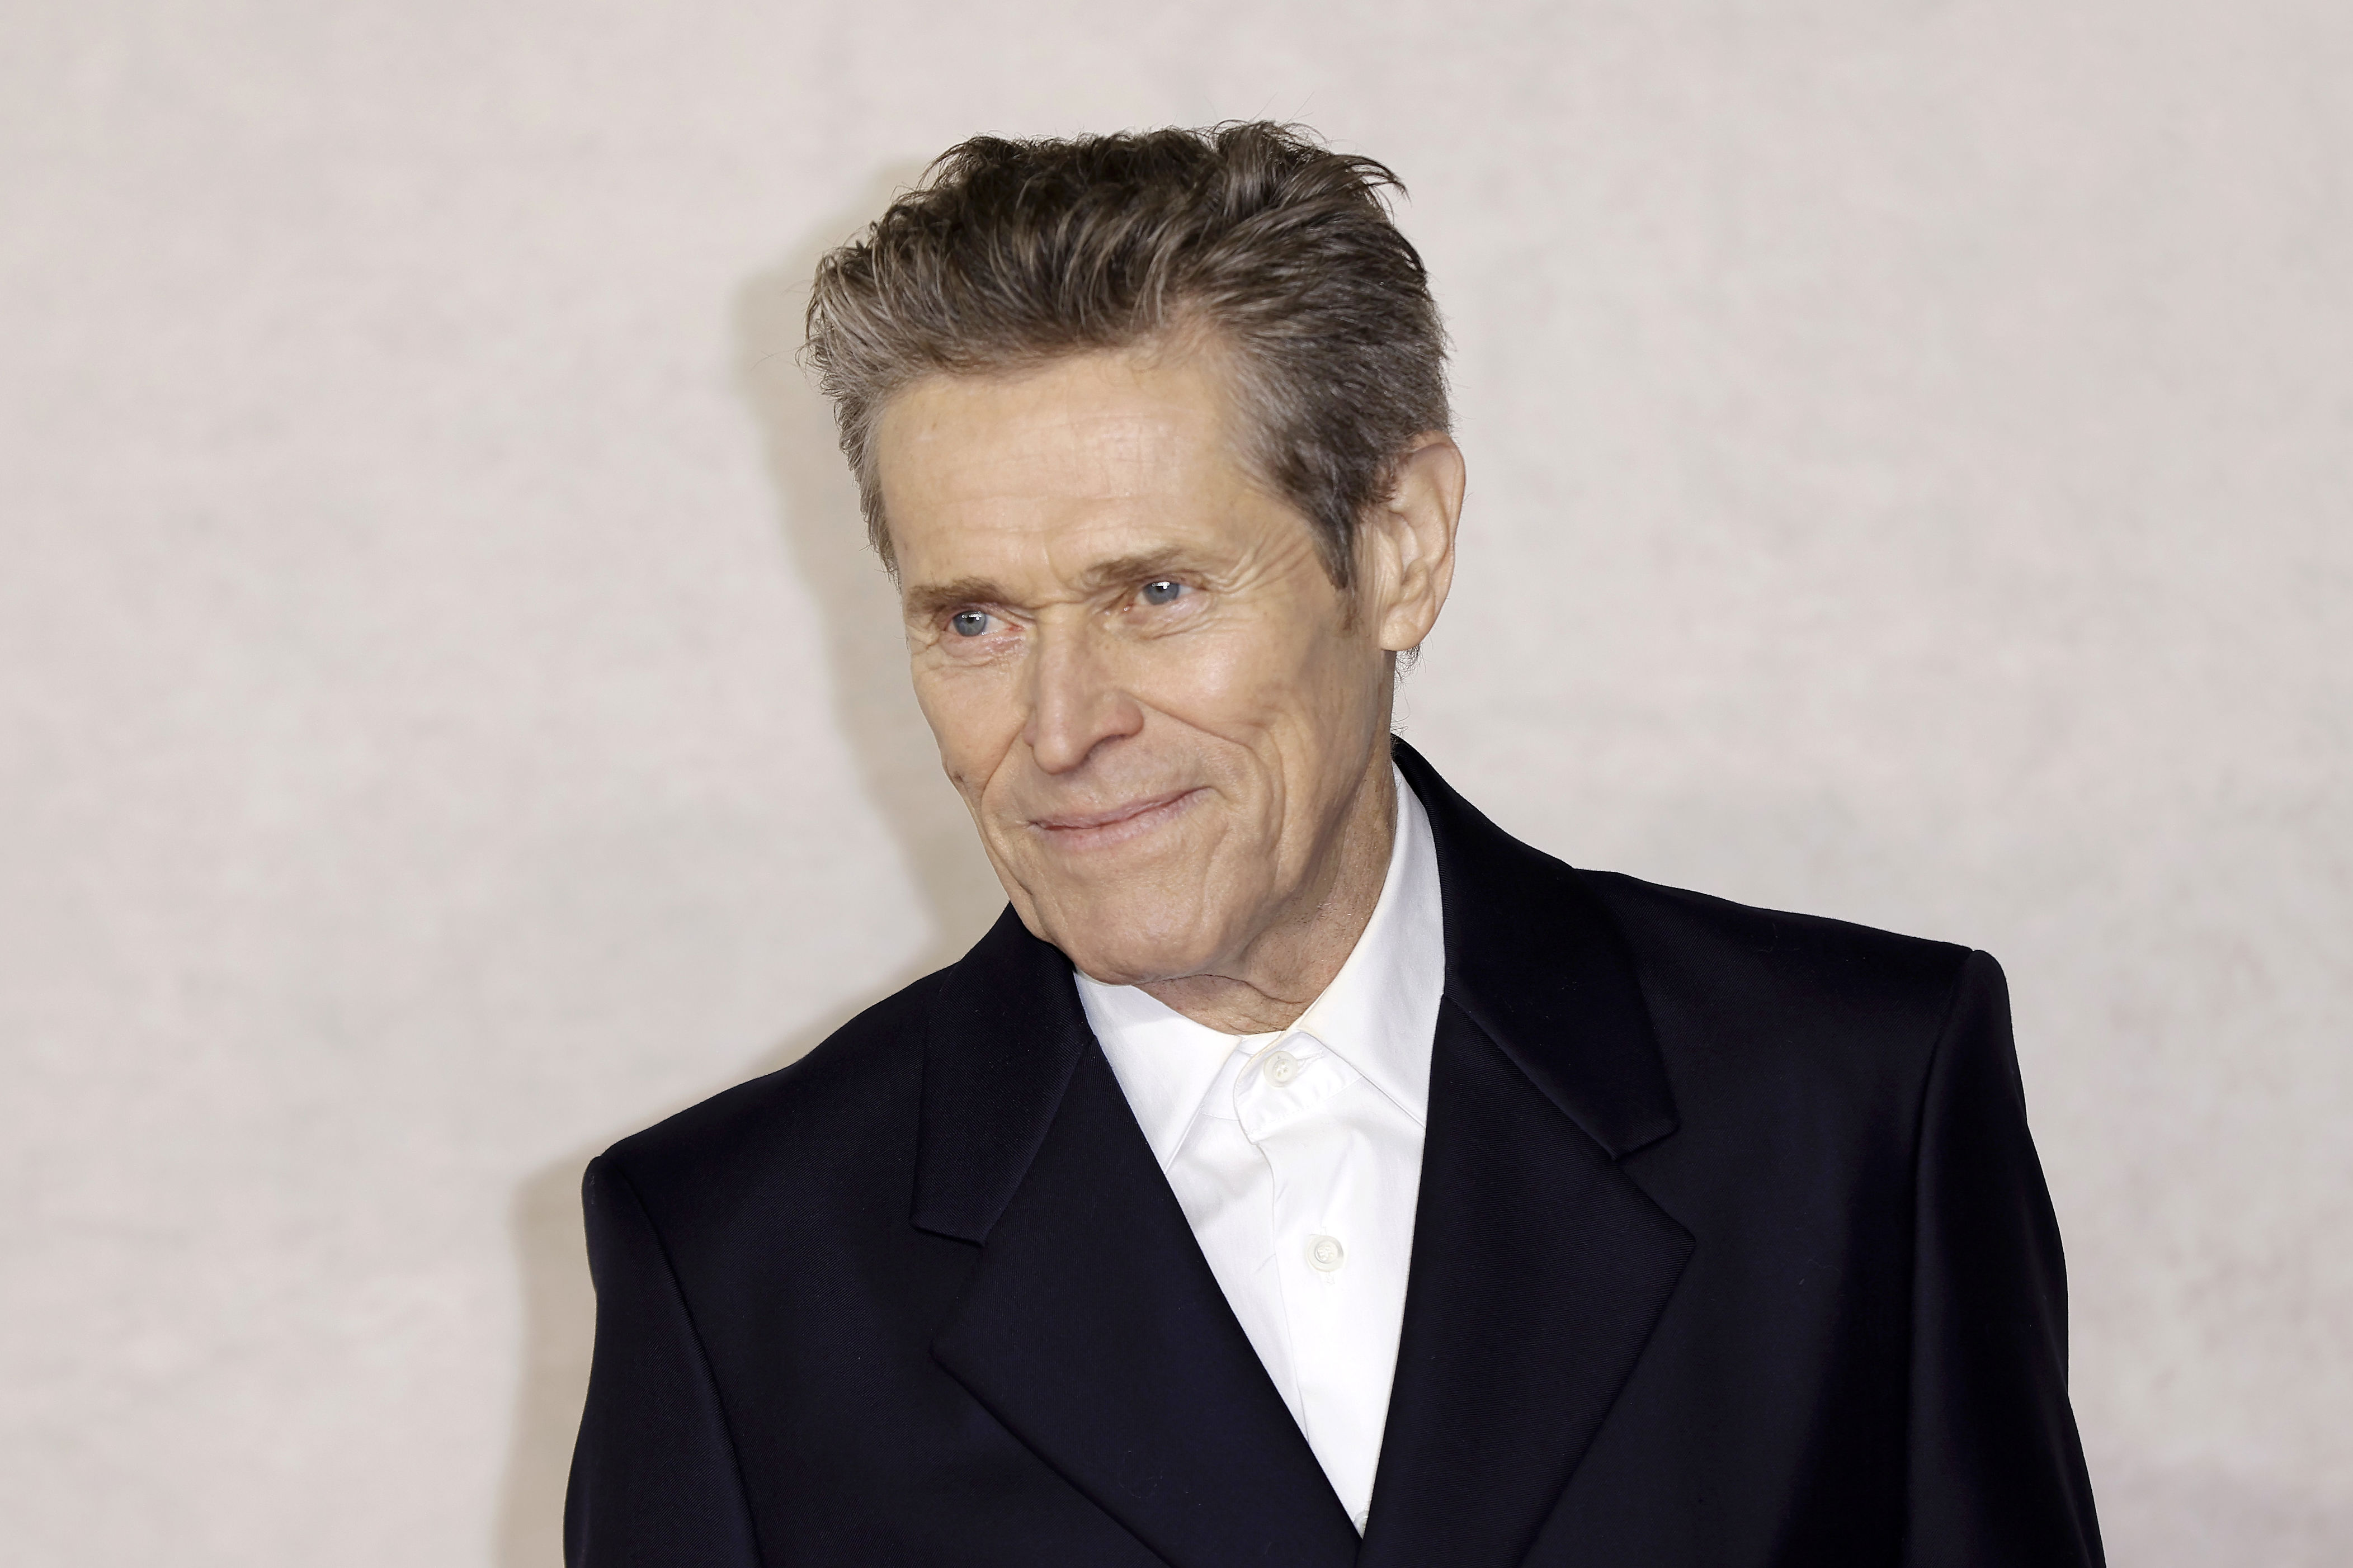 willem dafoe: ‘challenging movies' don't do well on streaming because ‘people go home' and say ‘let's watch something stupid tonight'